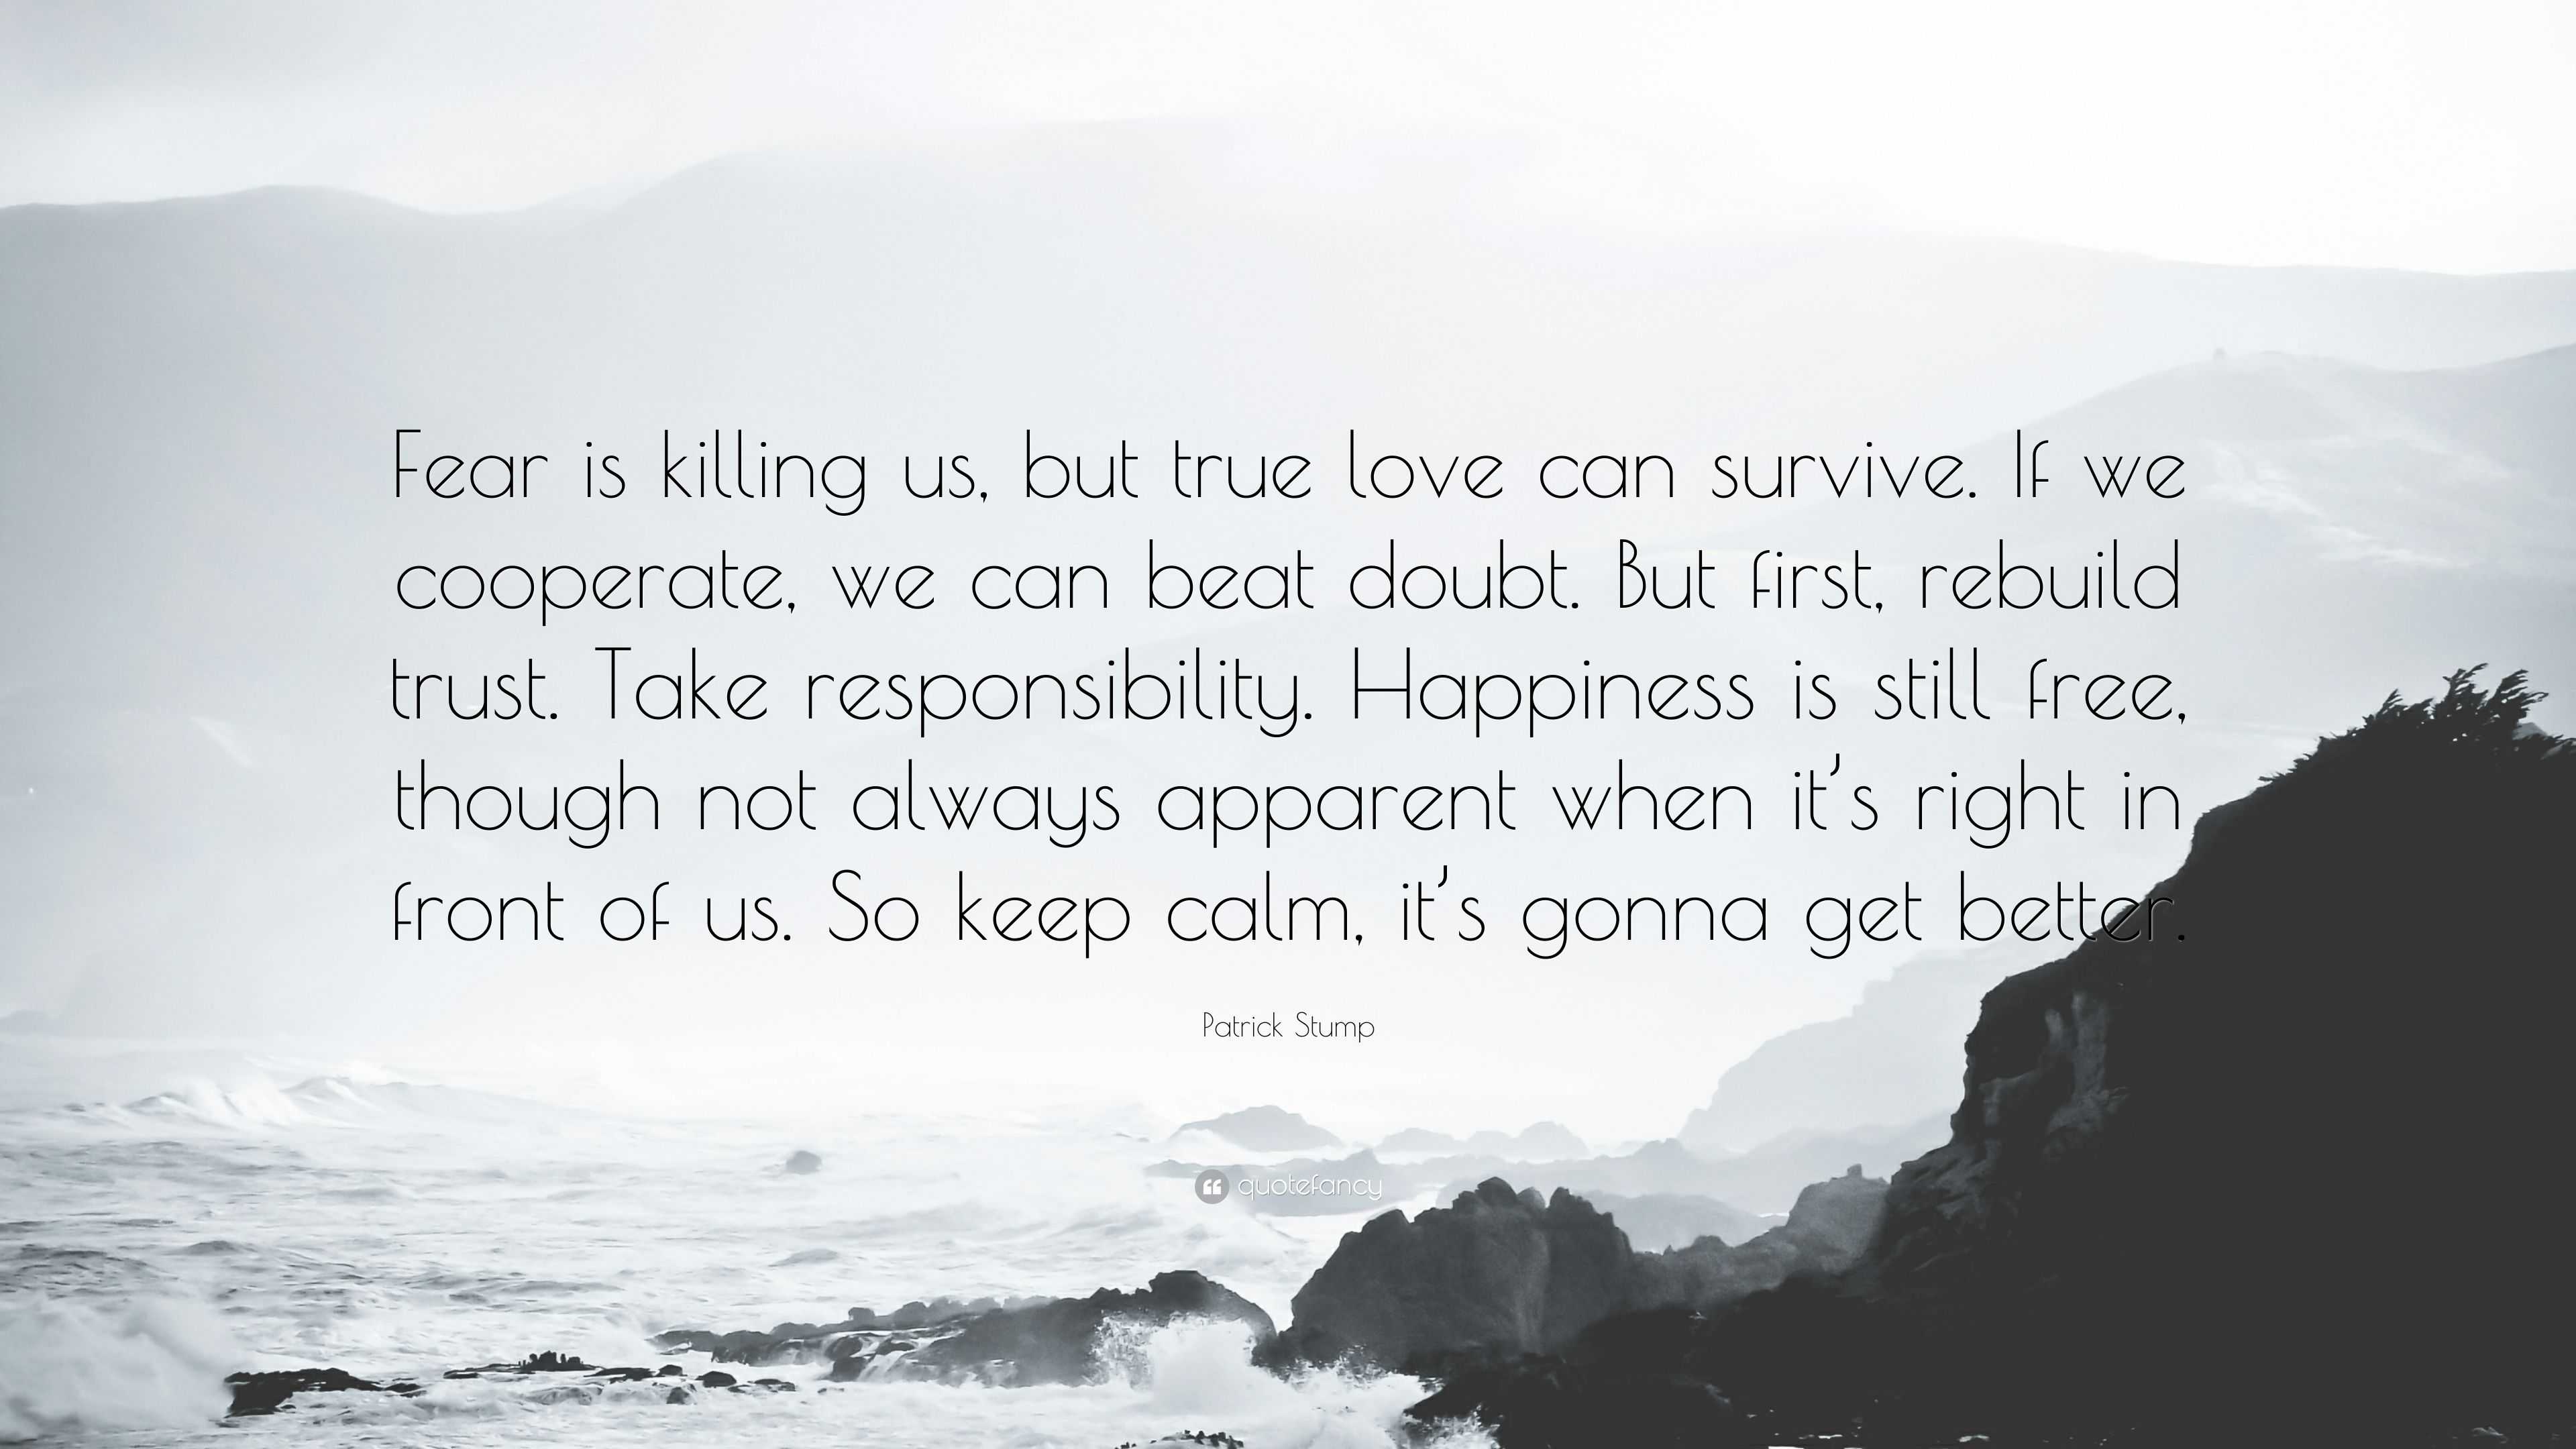 Patrick Stump Quote “Fear is killing us but true love can survive